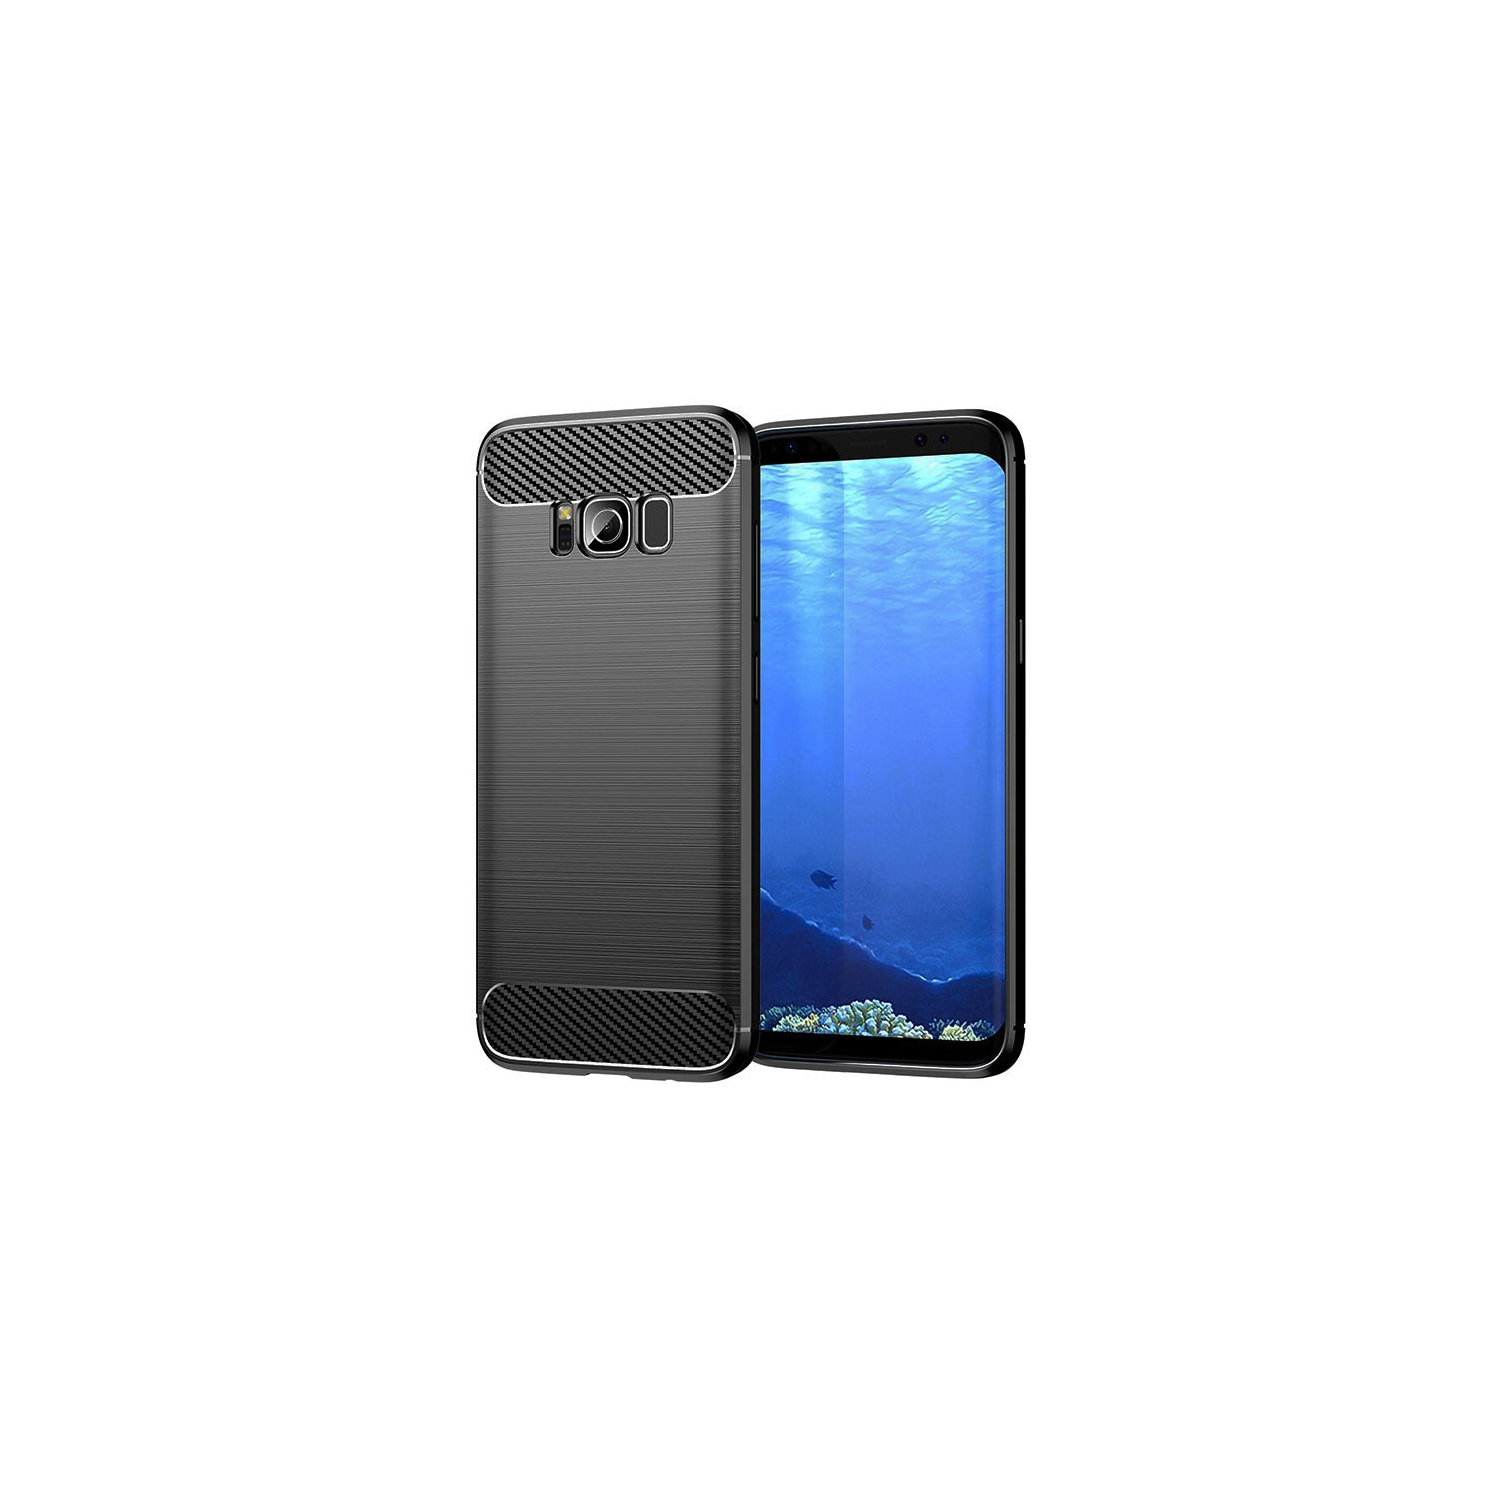 PANDACO Black Brushed Metal Case for Samsung Galaxy S8+